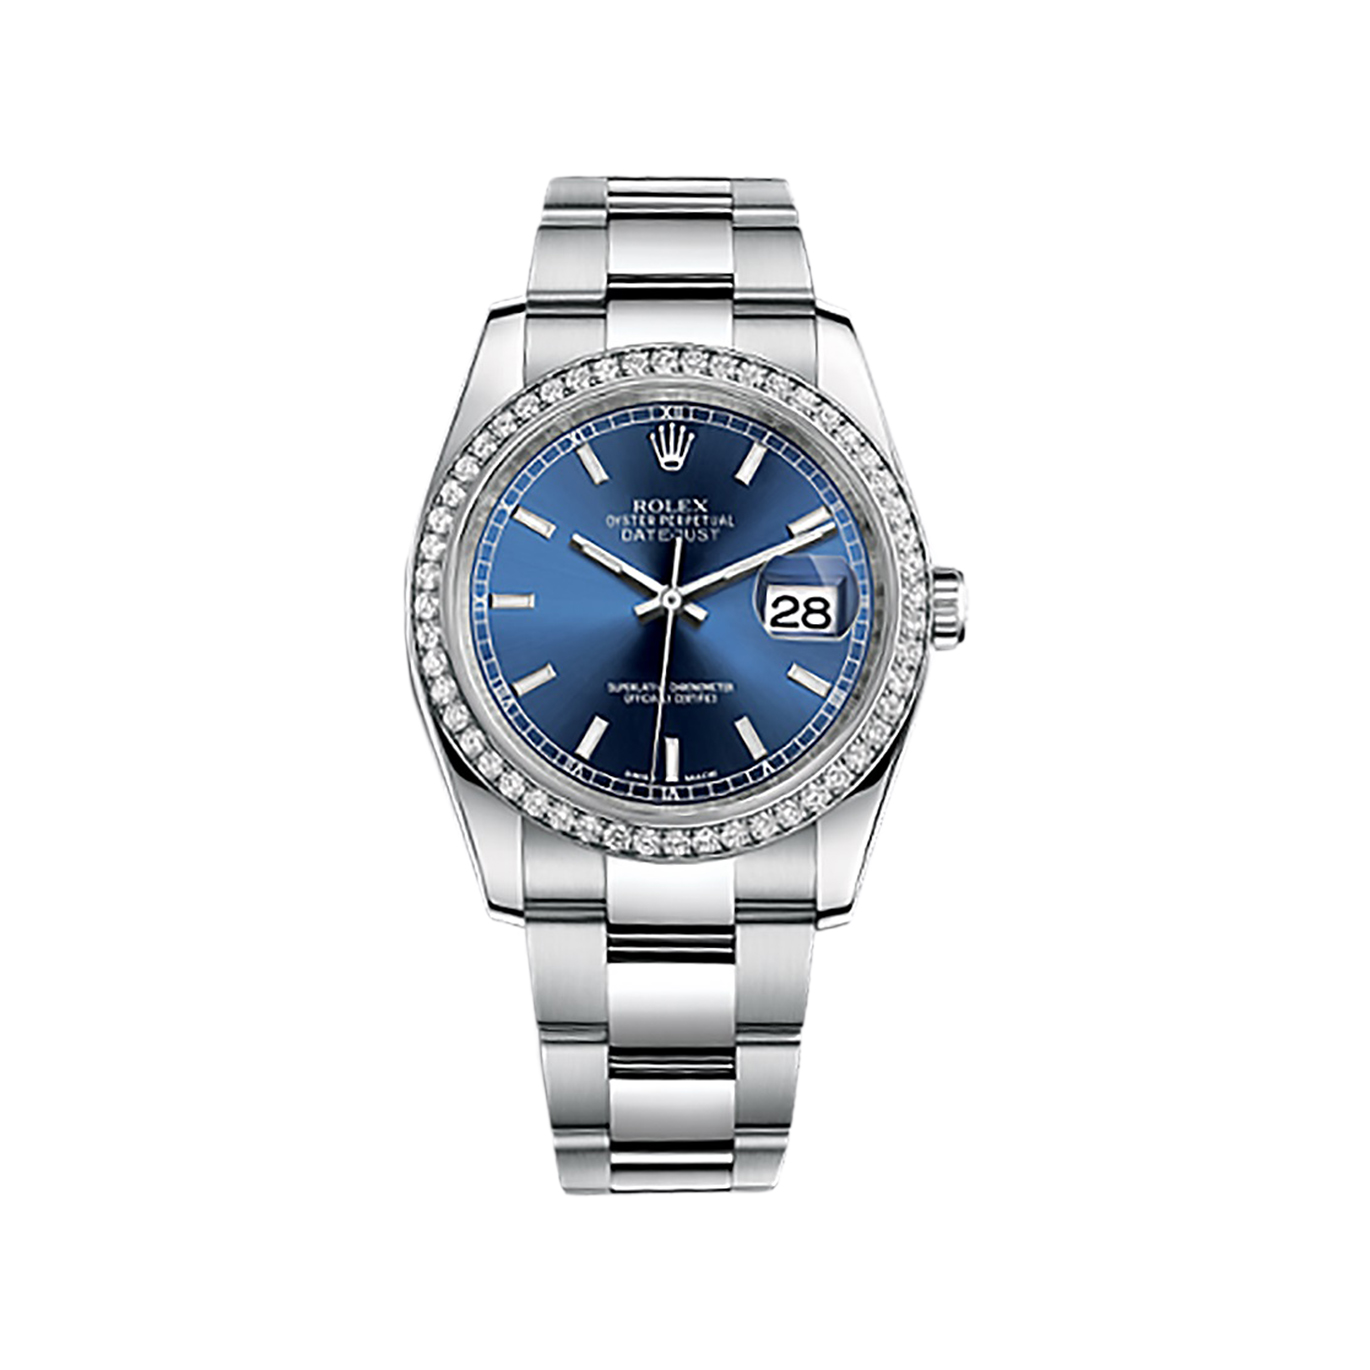 Datejust 36 116244 White Gold & Stainless Steel Watch (Blue)